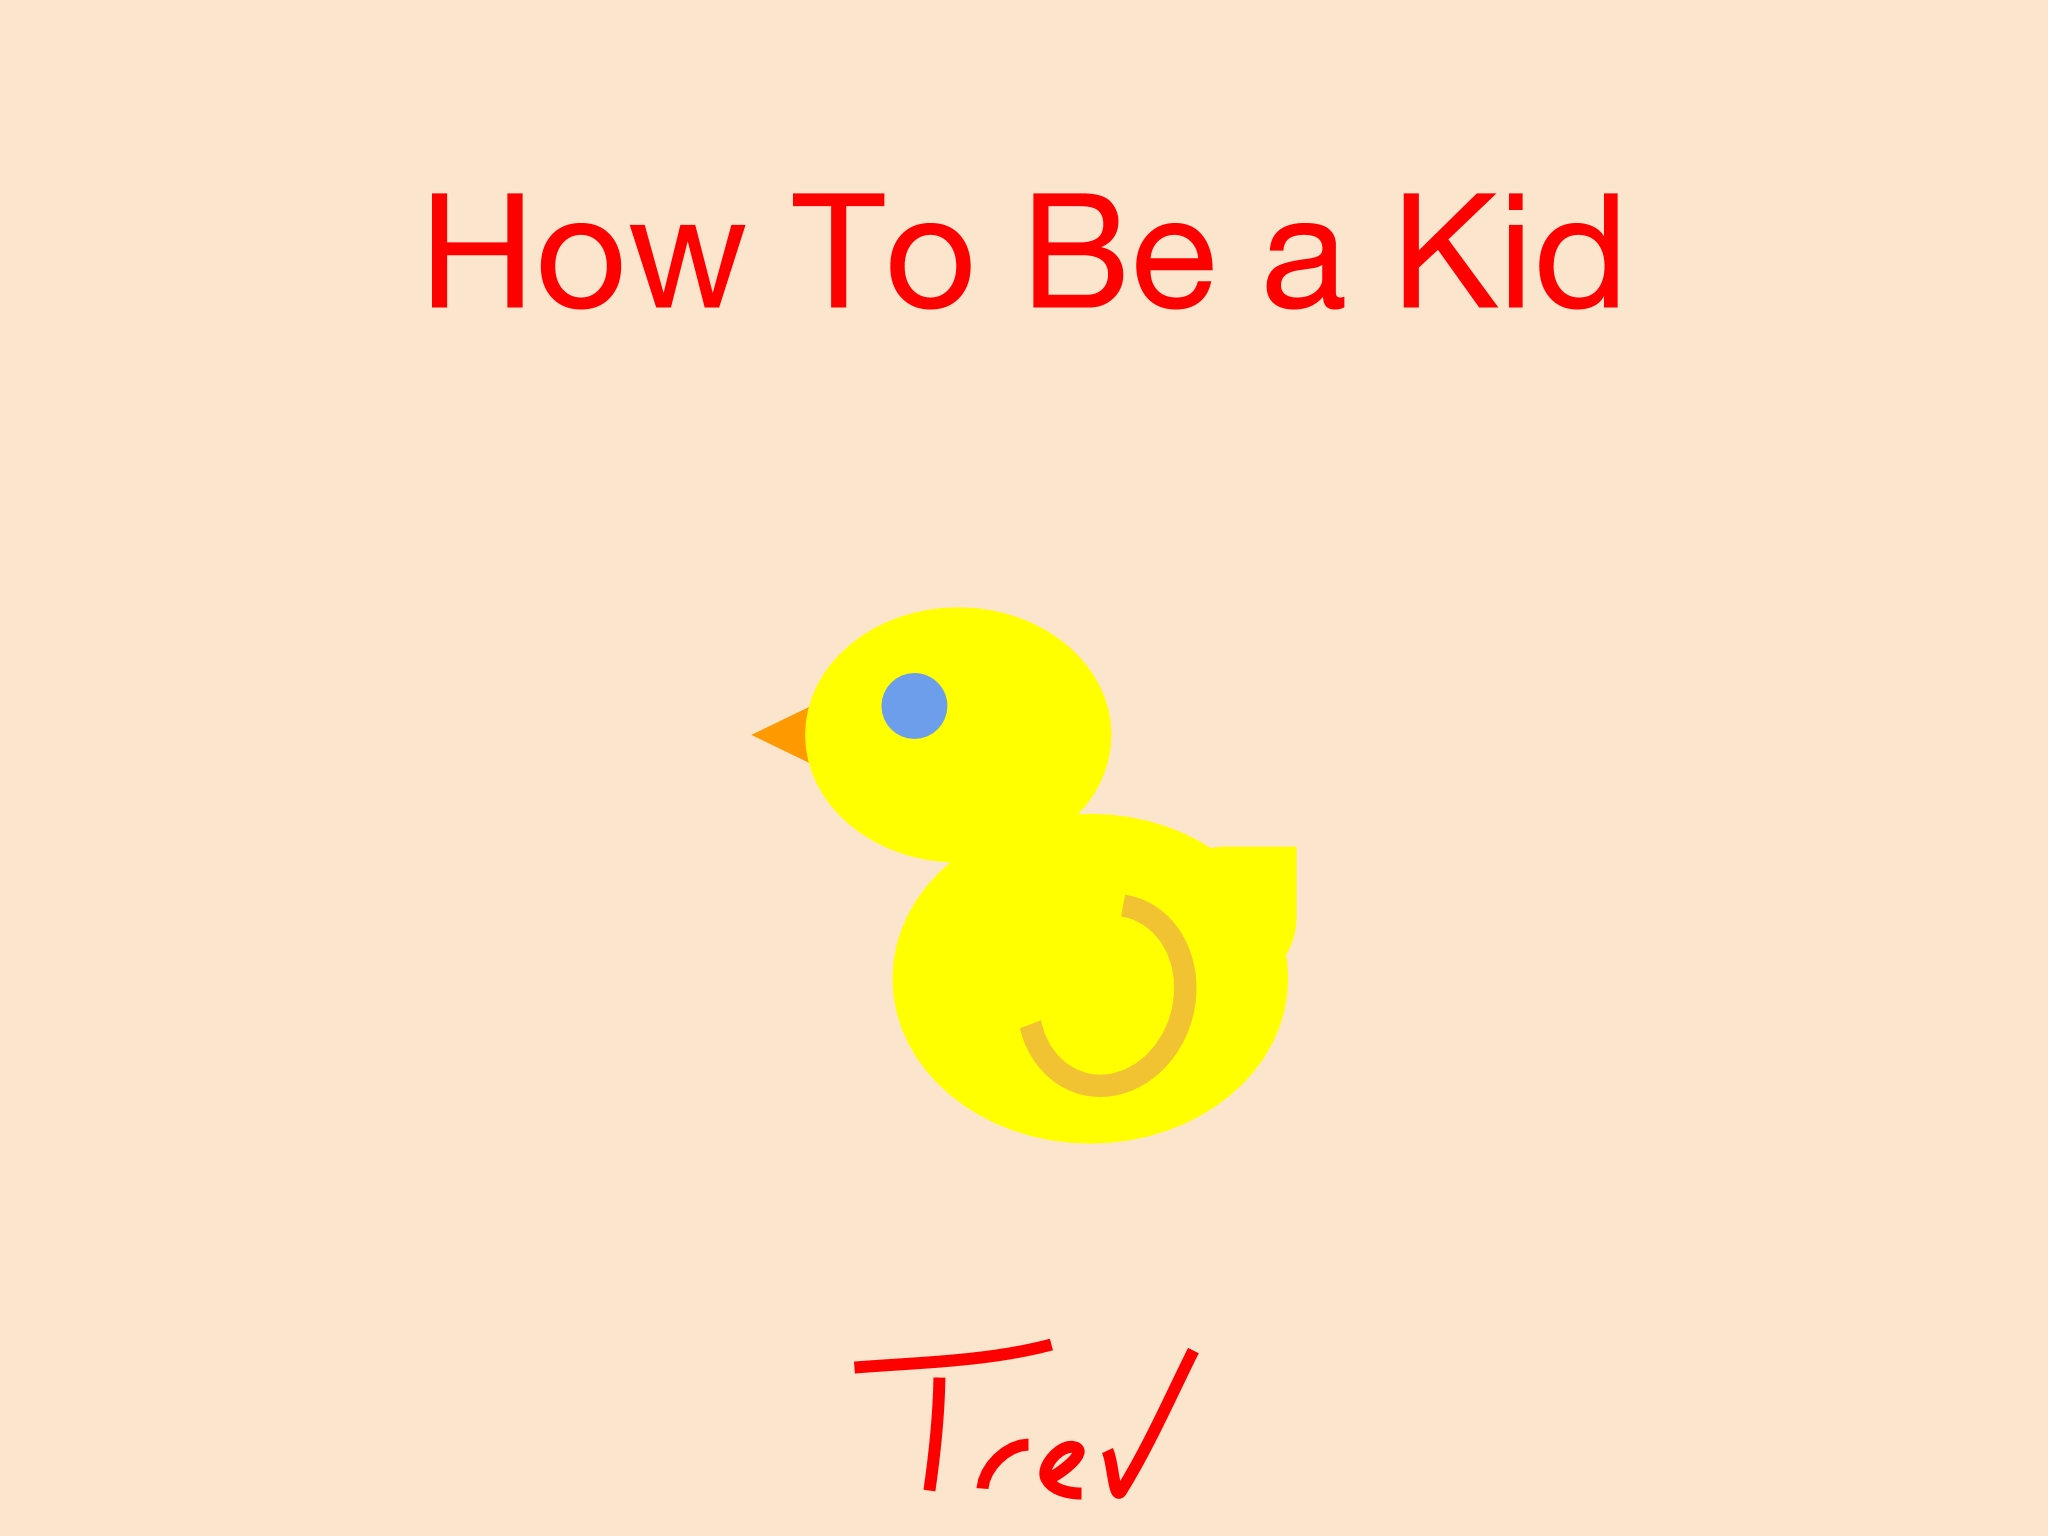 How To Be a Kid